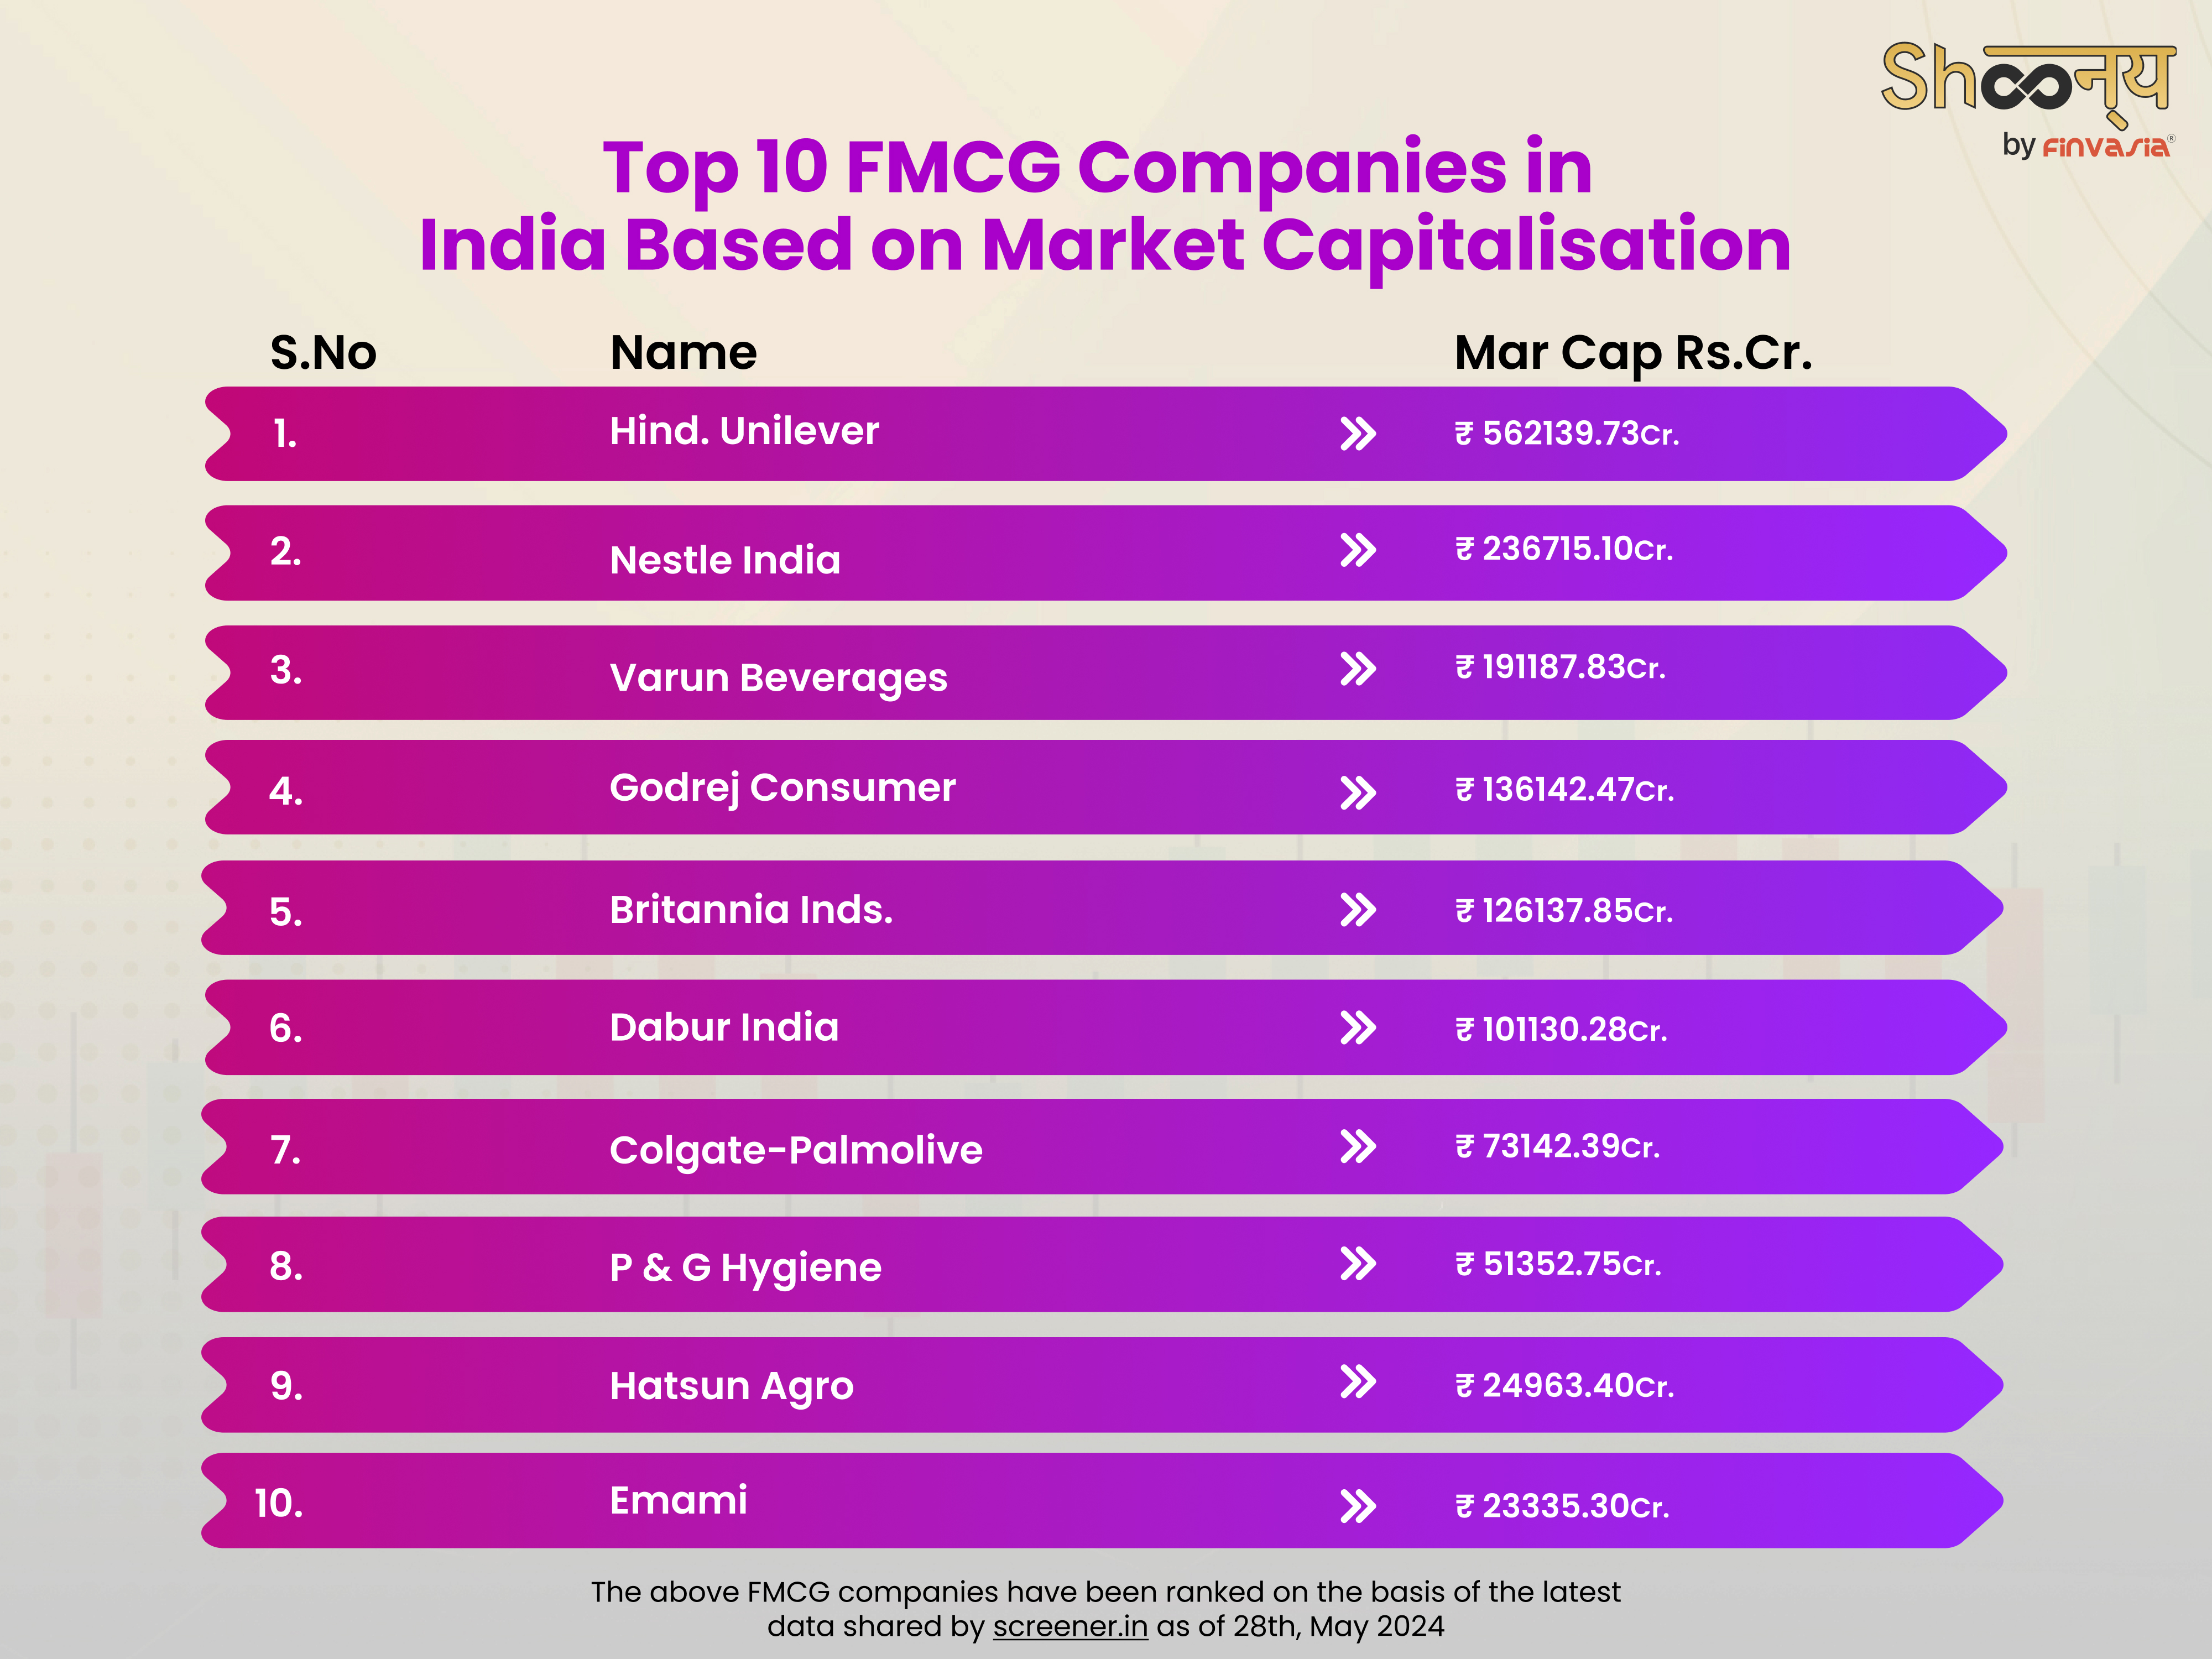 Top 10 FMCG Companies in India Based on Market Capitalisation 2024